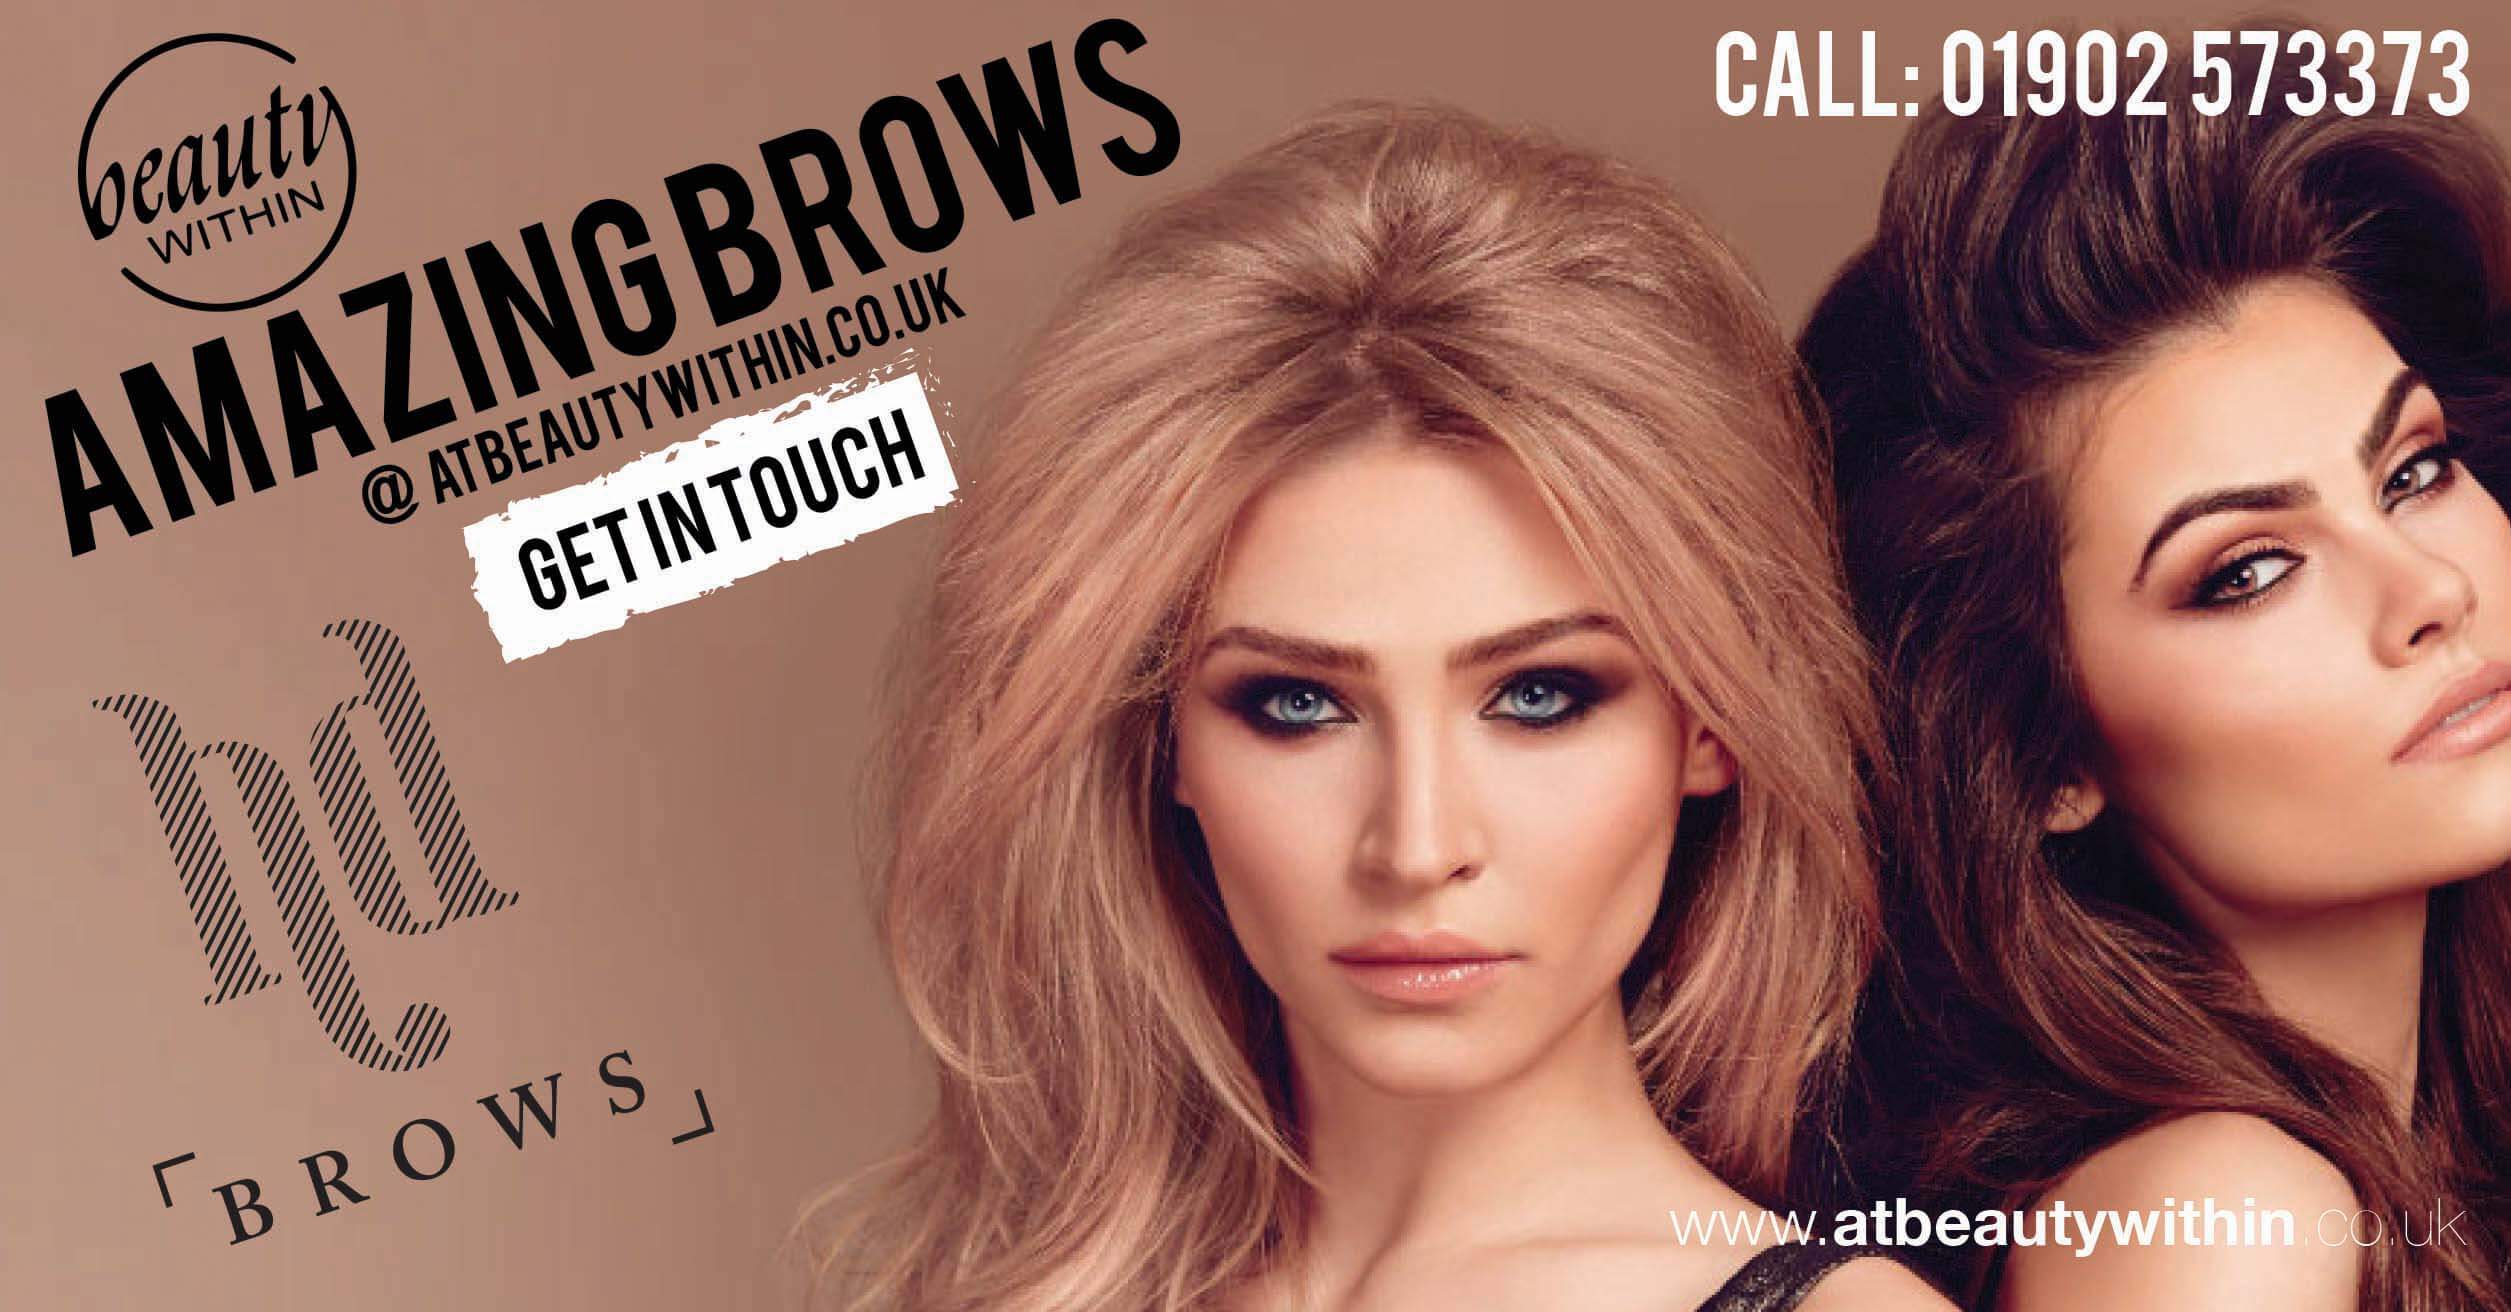 HD Brows Advert amazing